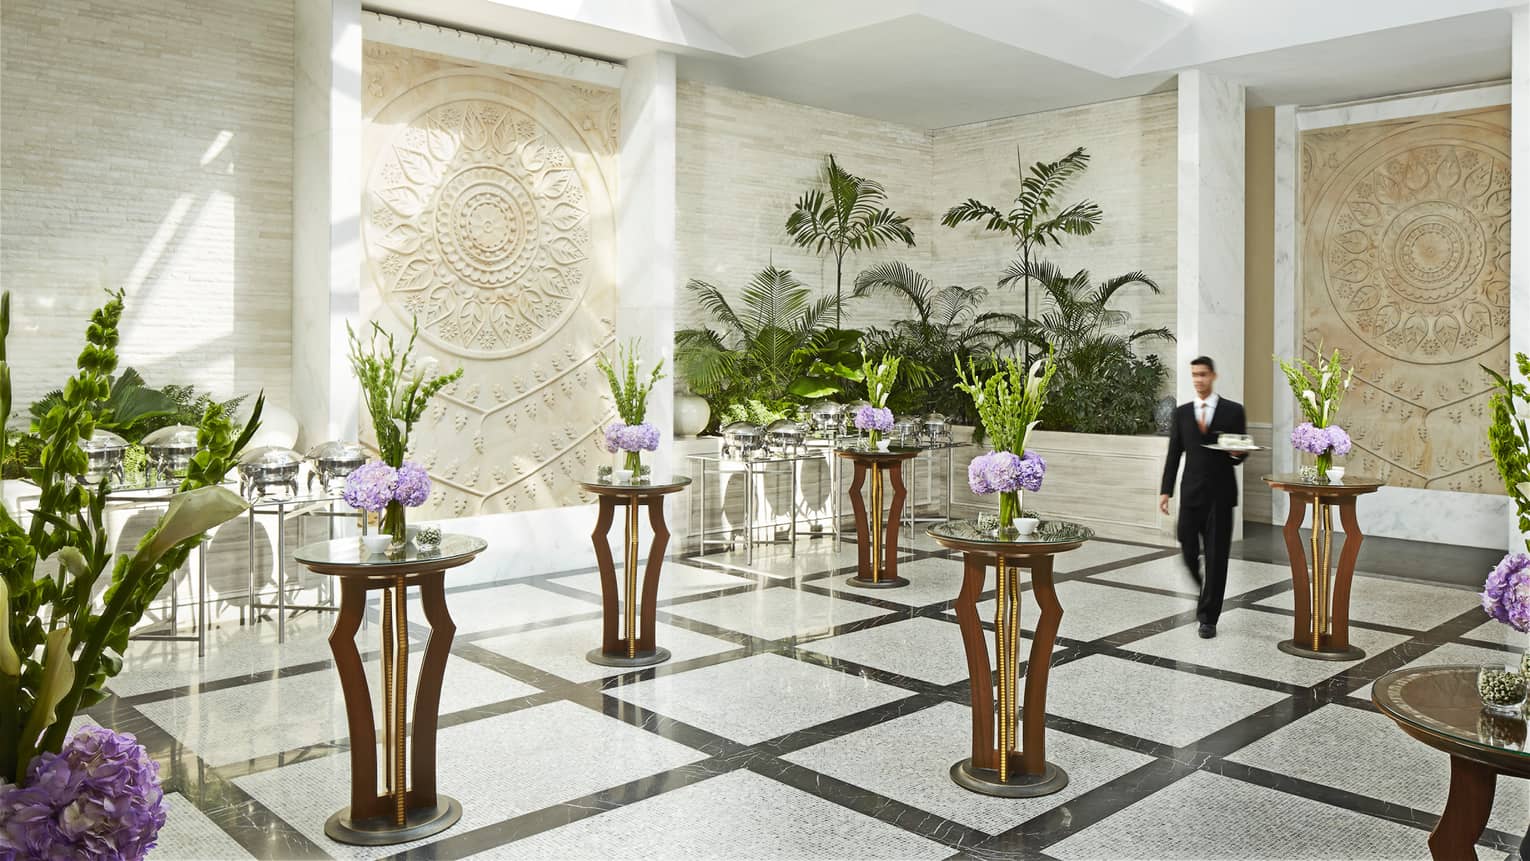 Server with tray walks through white marble room with accent tables, floral displays